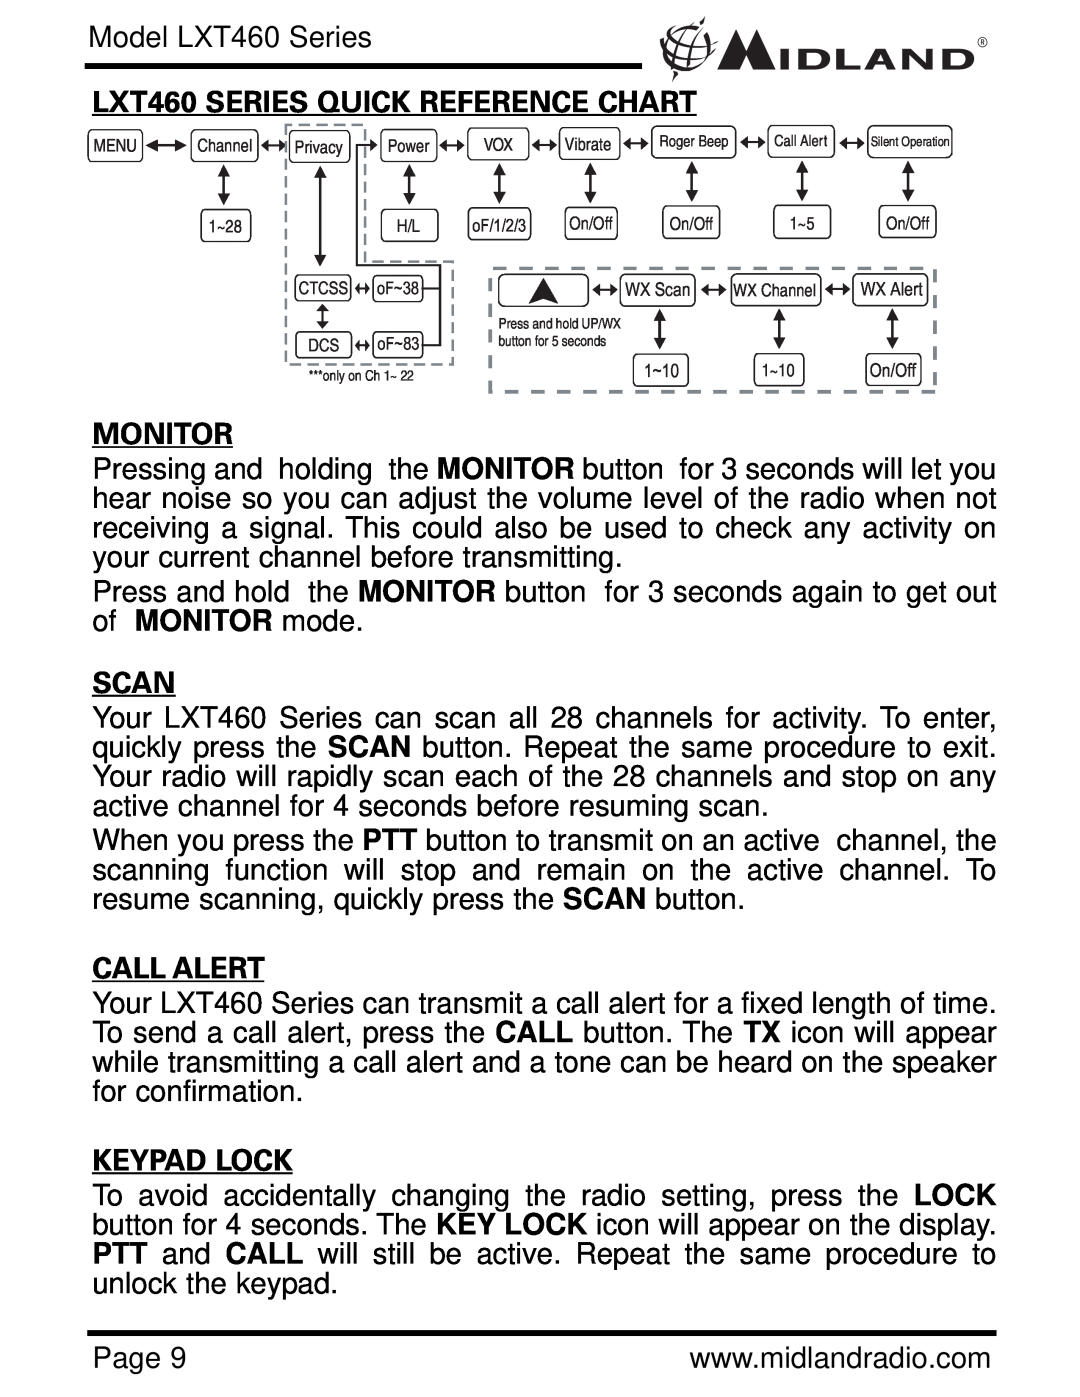 Midland Radio LXT460 Series owner manual LXT460 SERIES QUICK REFERENCE CHART, Monitor, Scan, Call Alert, Keypad Lock 